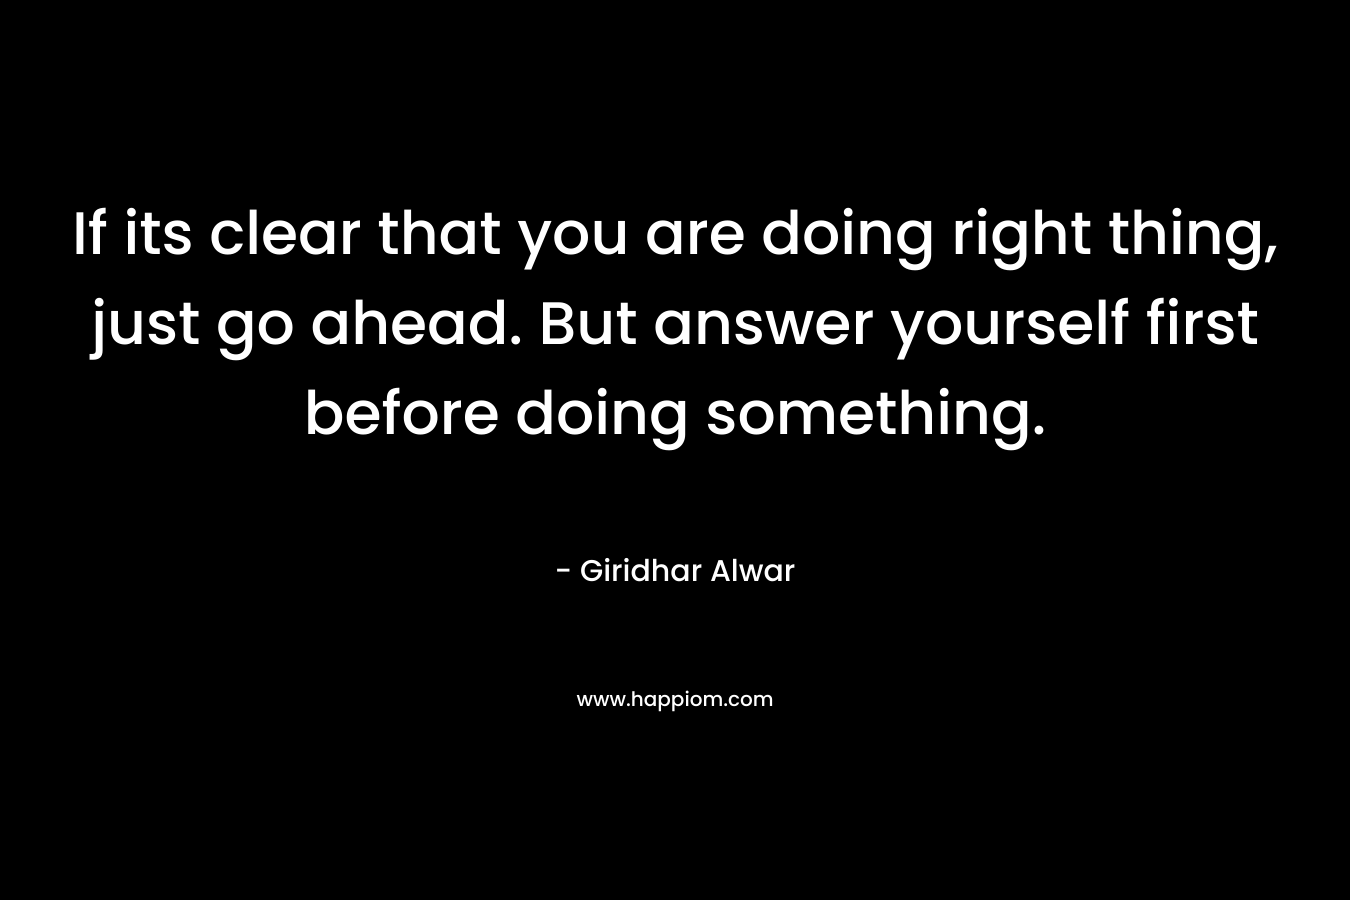 If its clear that you are doing right thing, just go ahead. But answer yourself first before doing something.